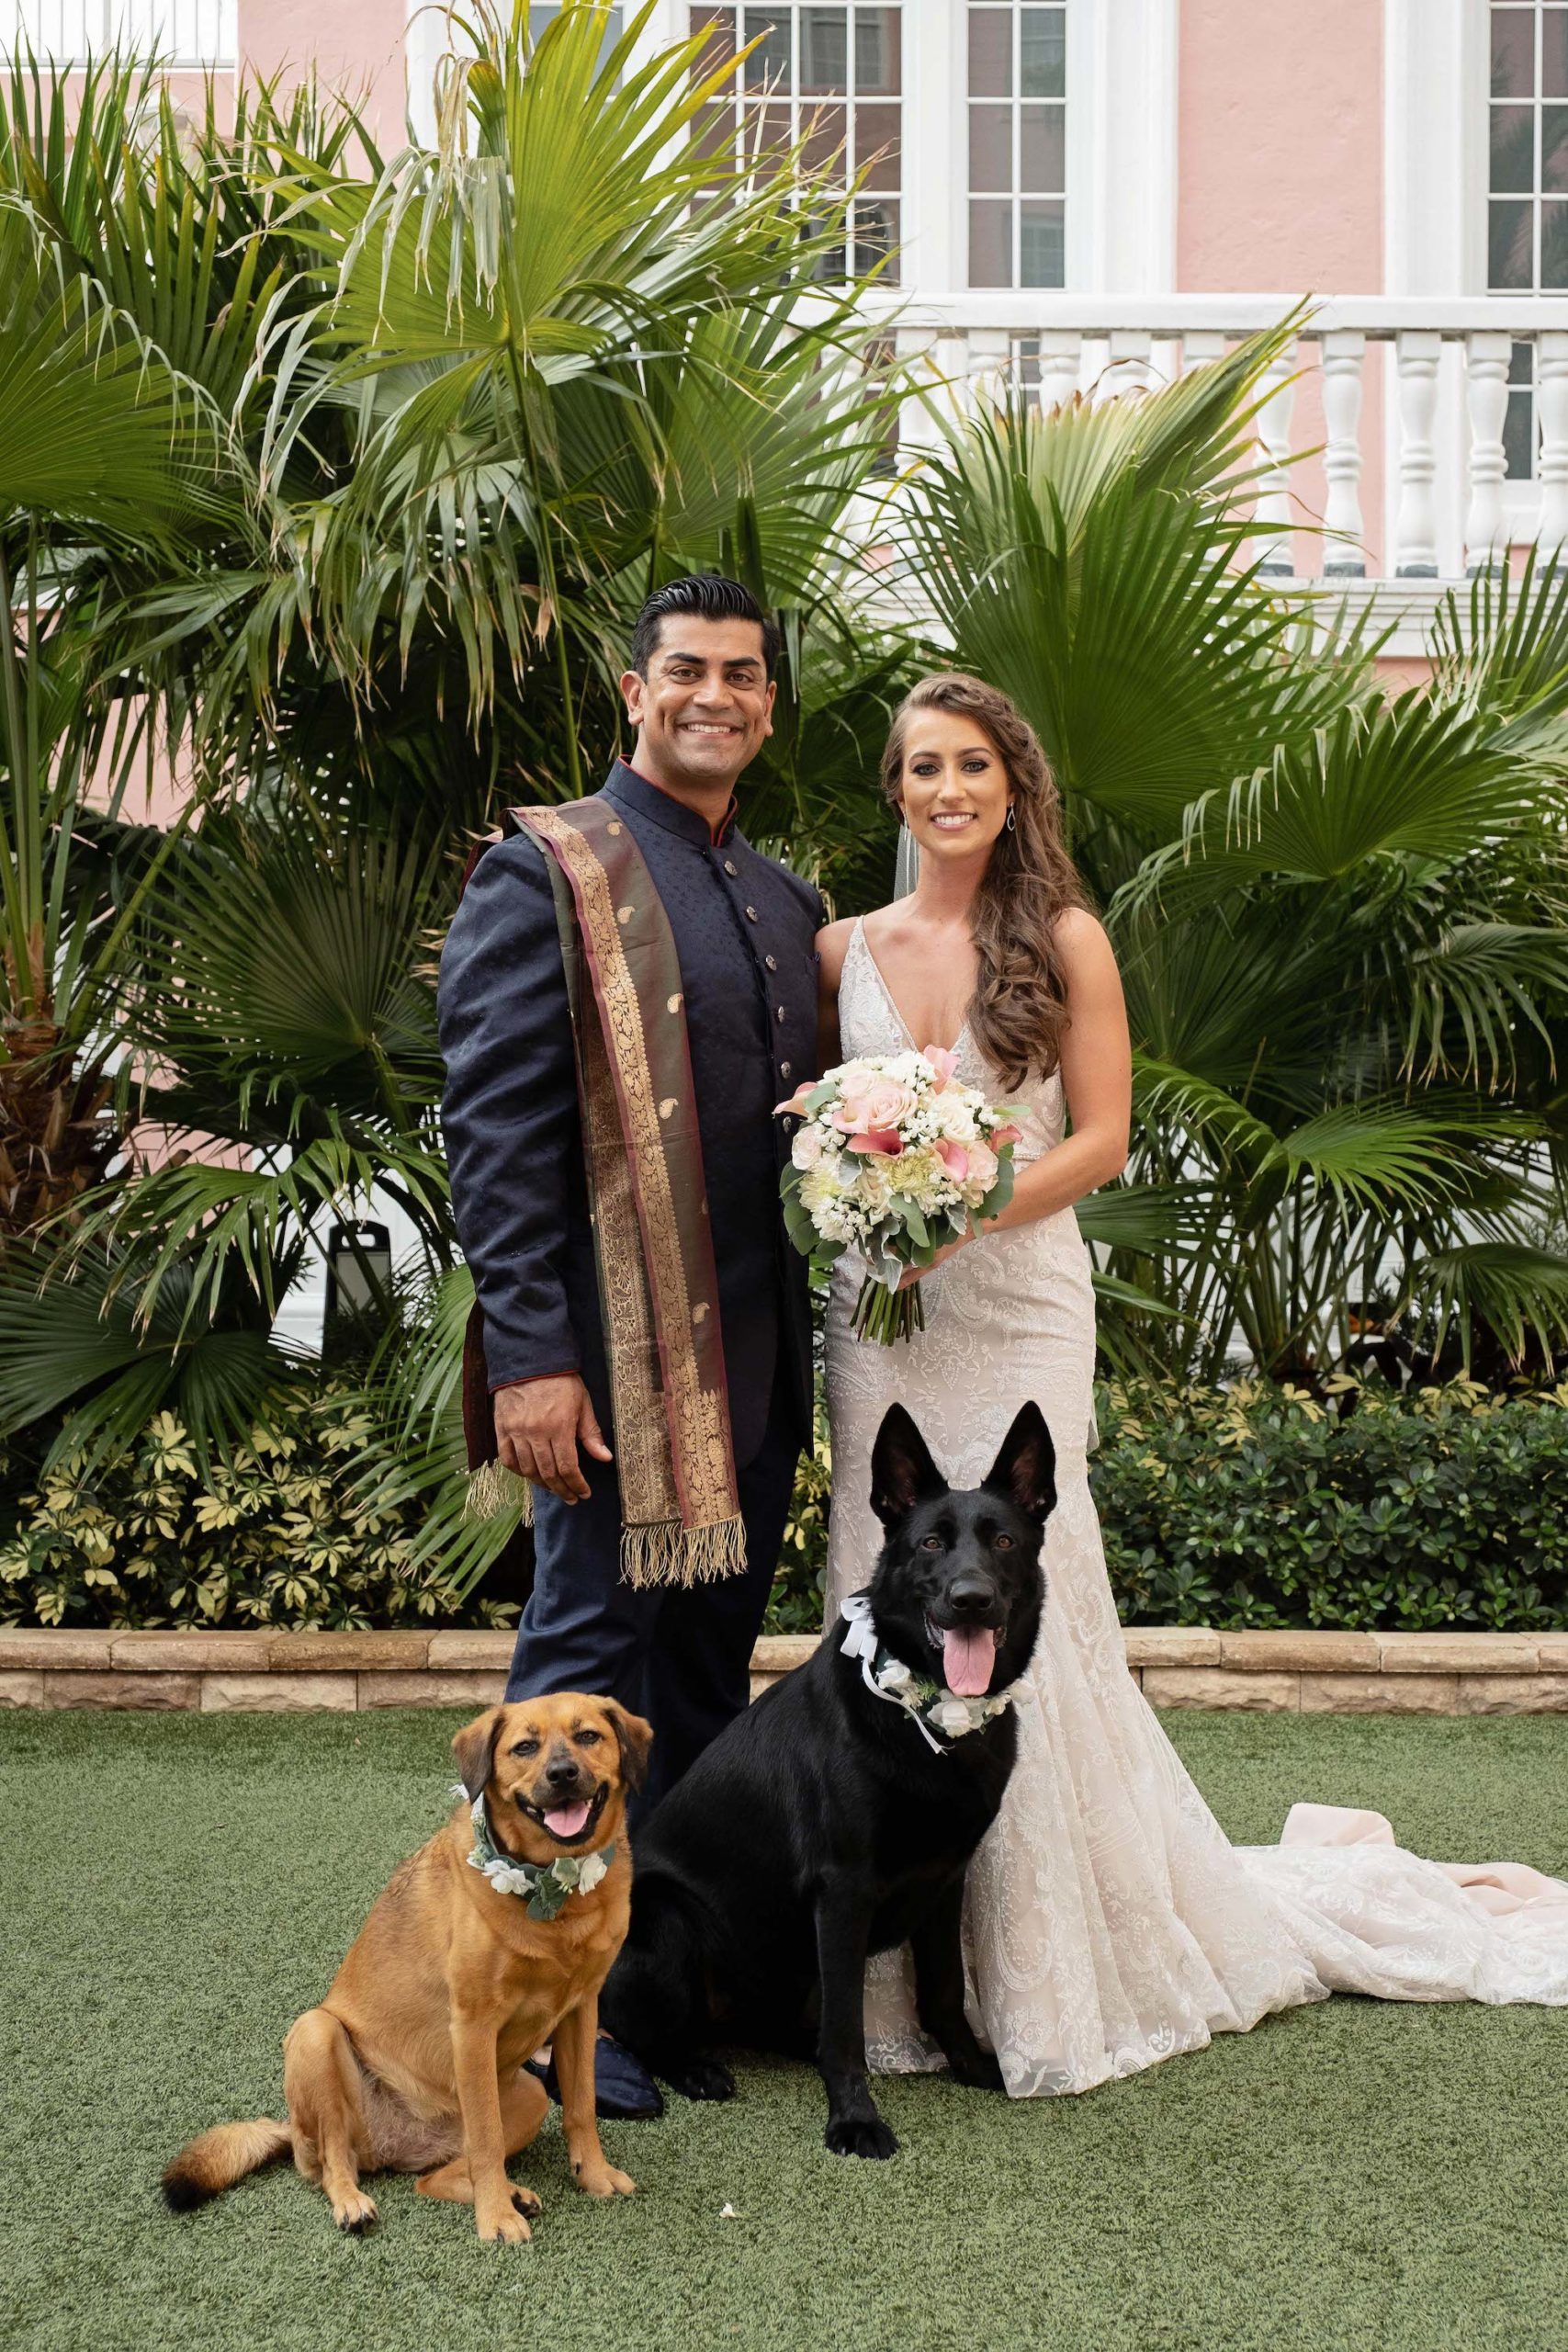 Florida Bride and Groom Wedding Portrait with Pets, Dogs in Floral Collars, Bride holding White, Pink and Ivory Floral Bouquet with Greenery, Groom Wearing Punjabi | Tampa Bay Wedding Petcare Planners Fairytail Pet Care | St. Pete Beach Historic Resort The Don CeSar